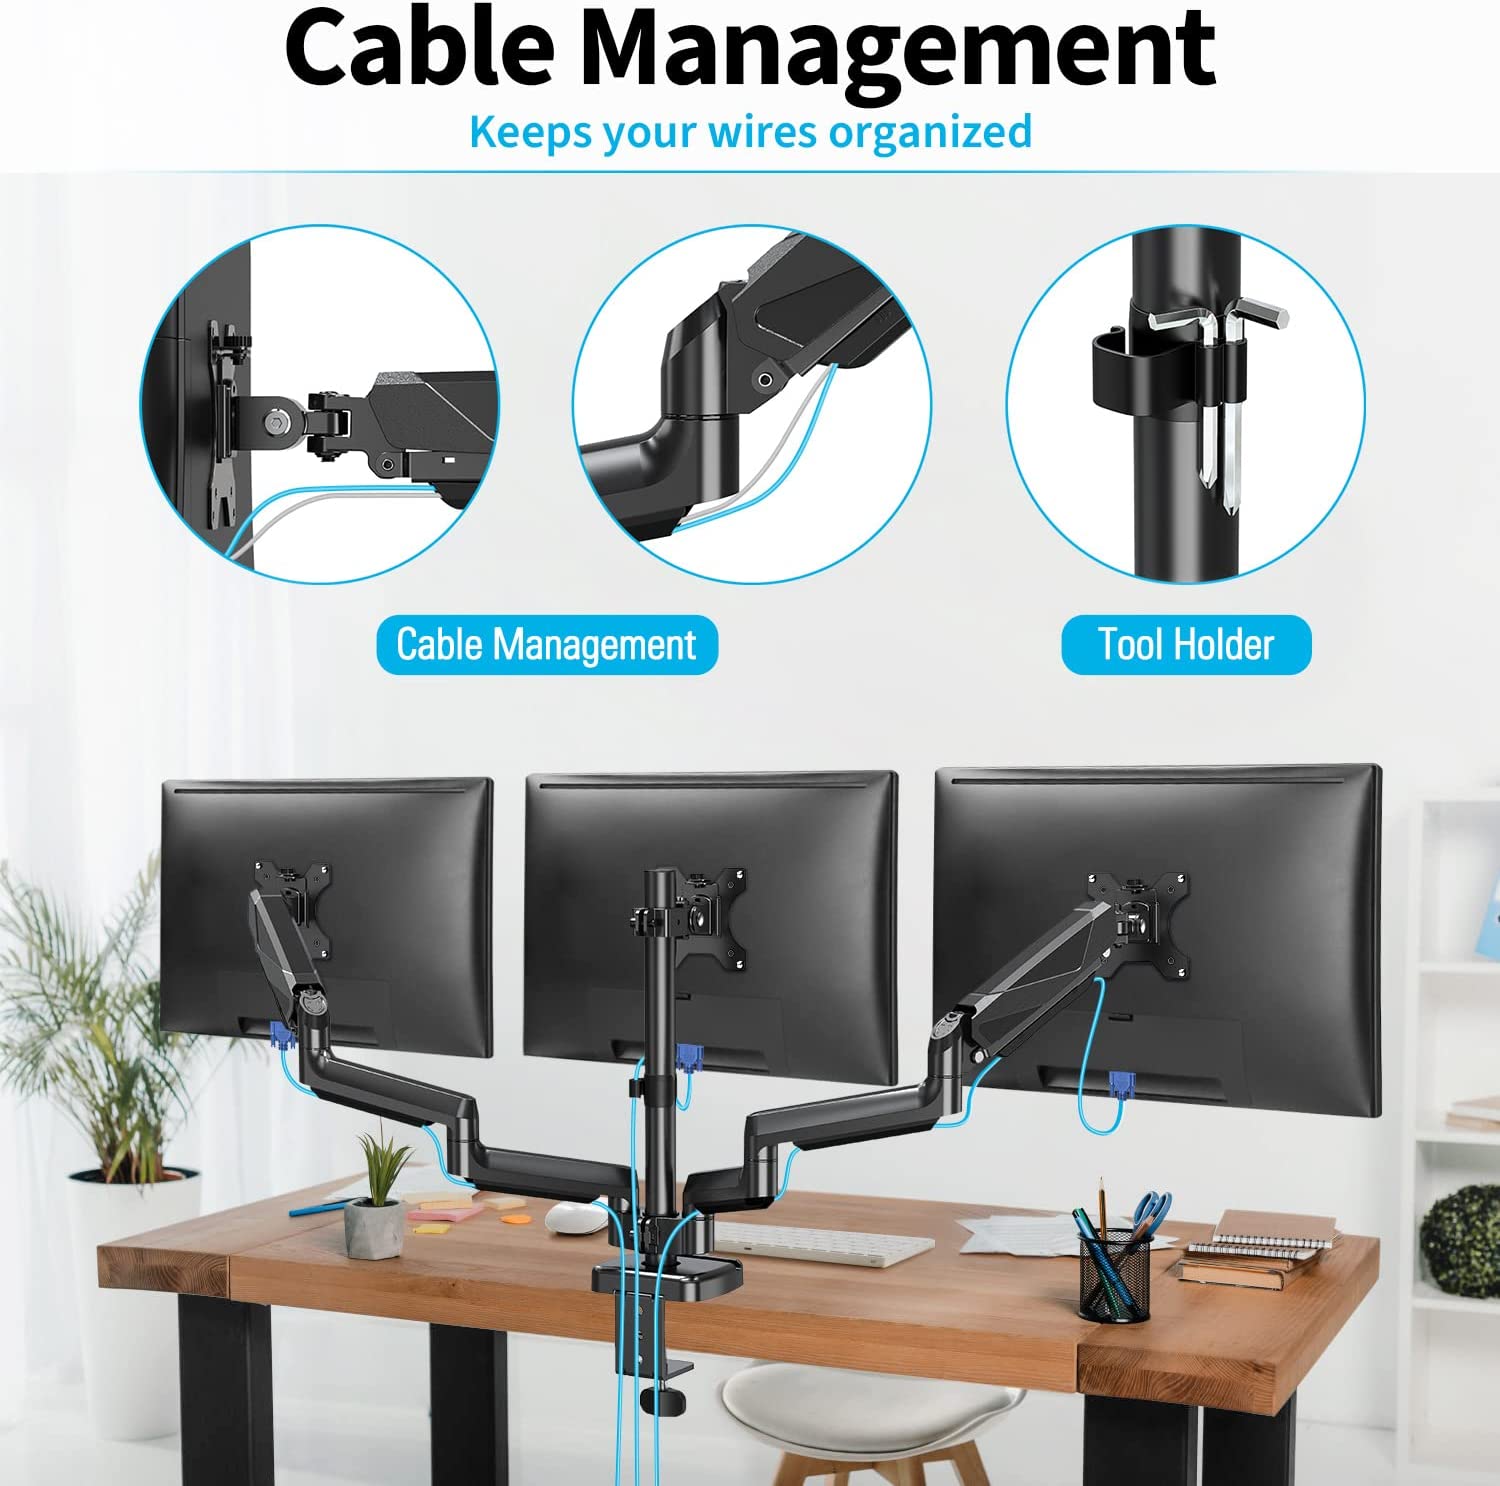 built-in cable management keeps wires organized and desk clean